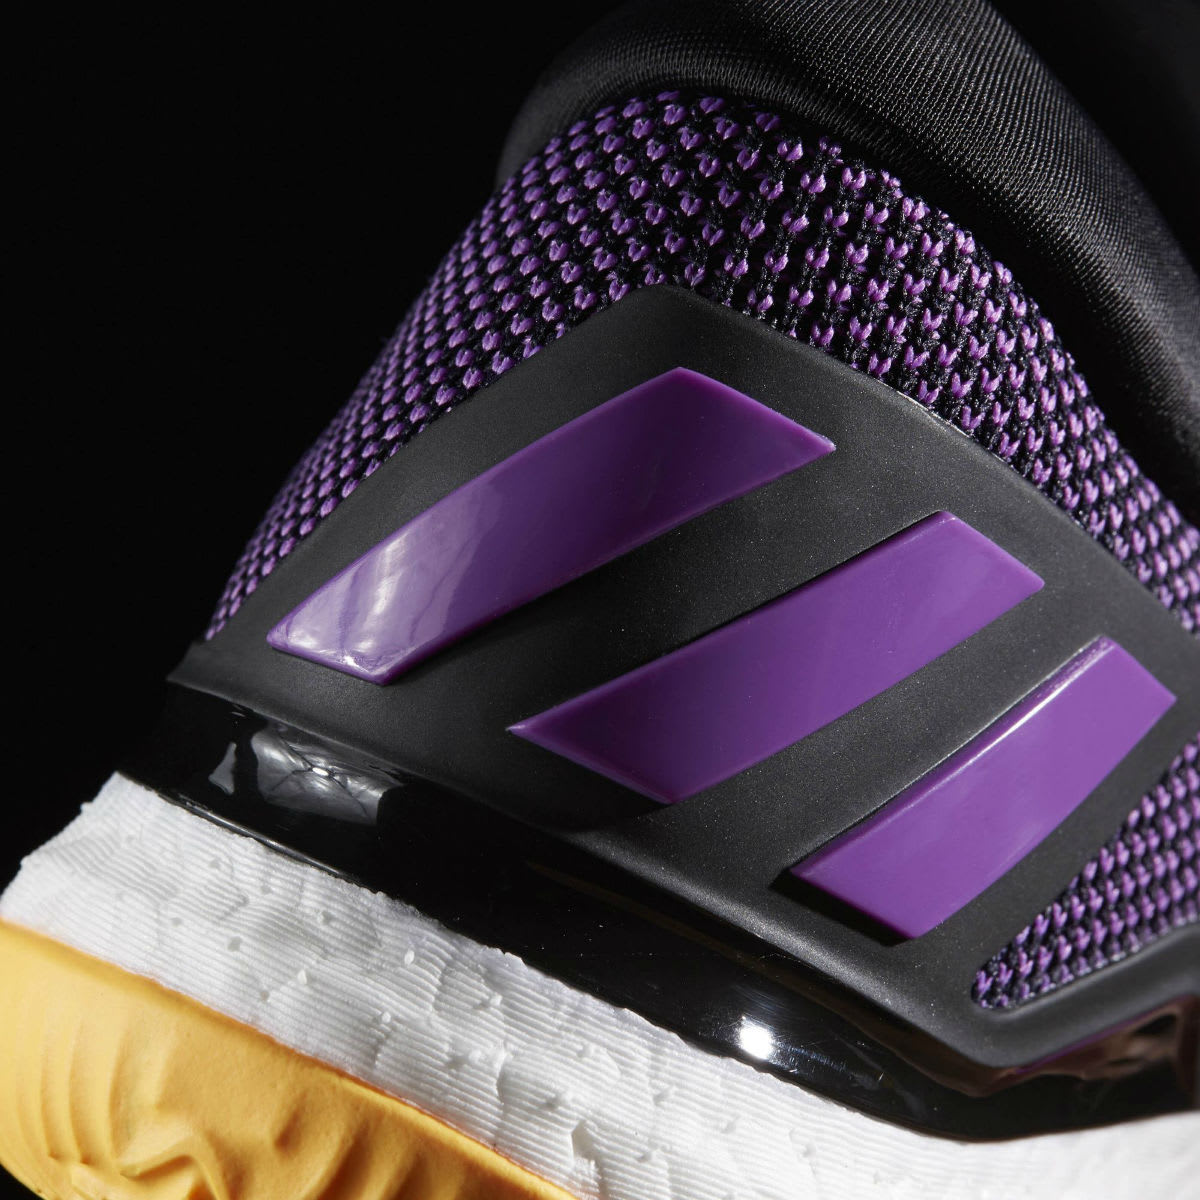 Adidas Crazylight Boost Swaggy P Lakers Heel BB8175